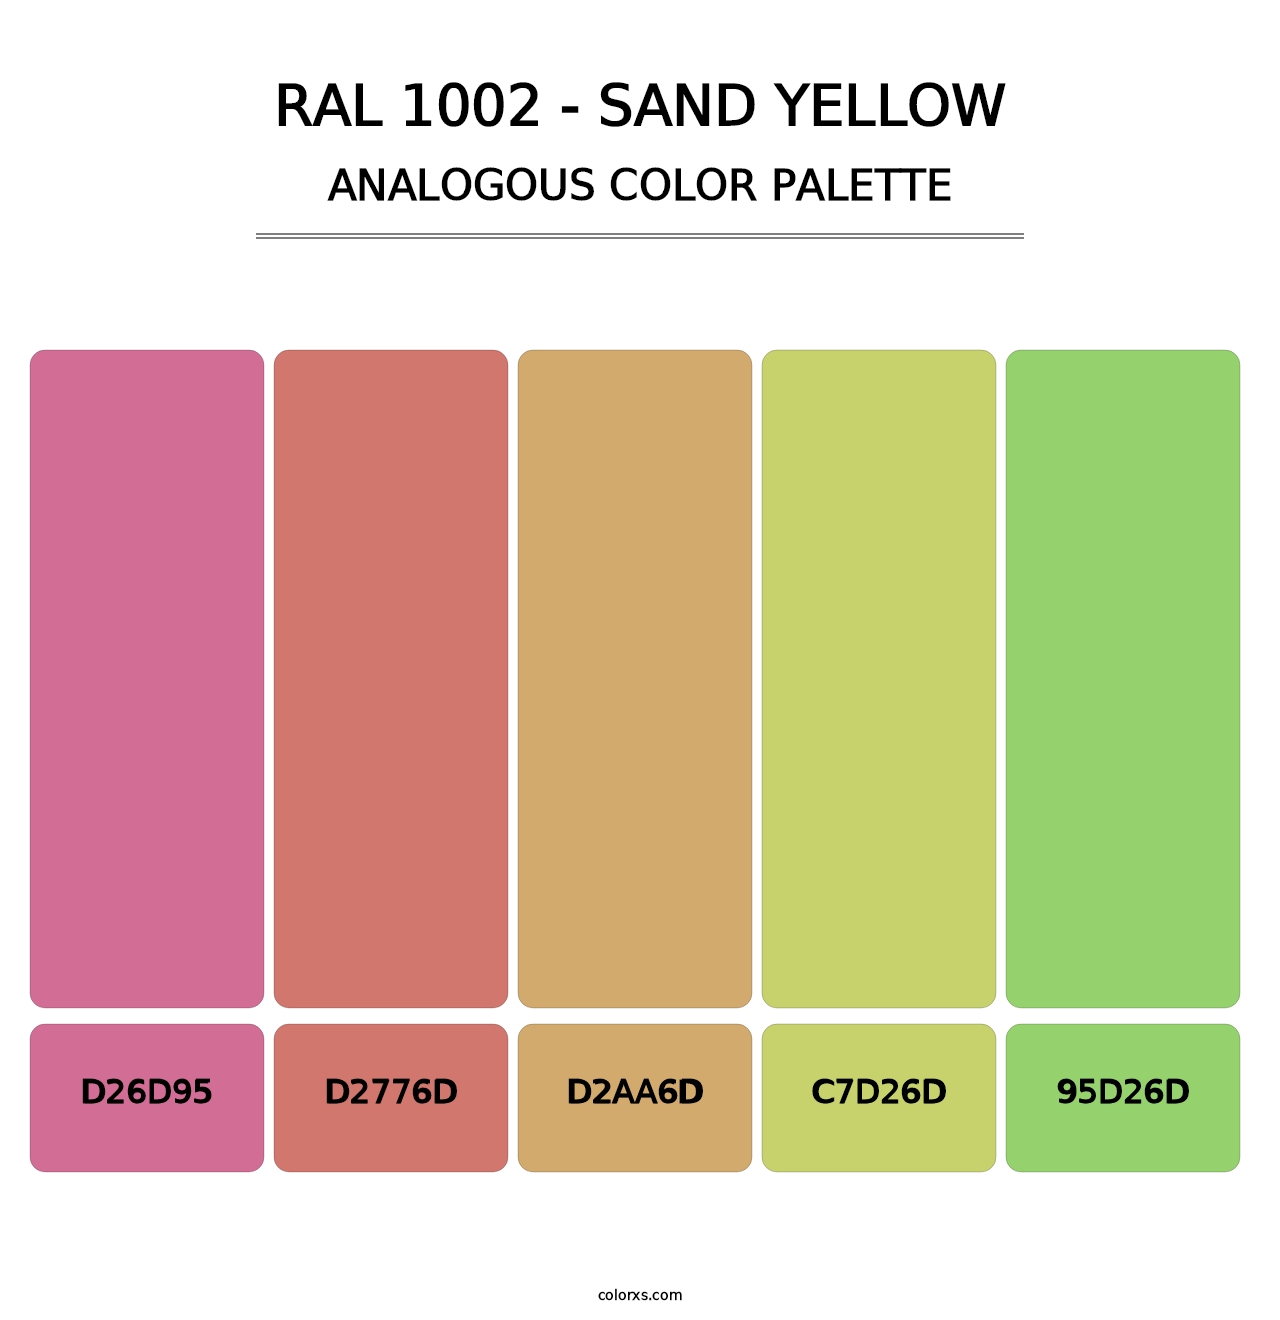 RAL 1002 - Sand Yellow - Analogous Color Palette